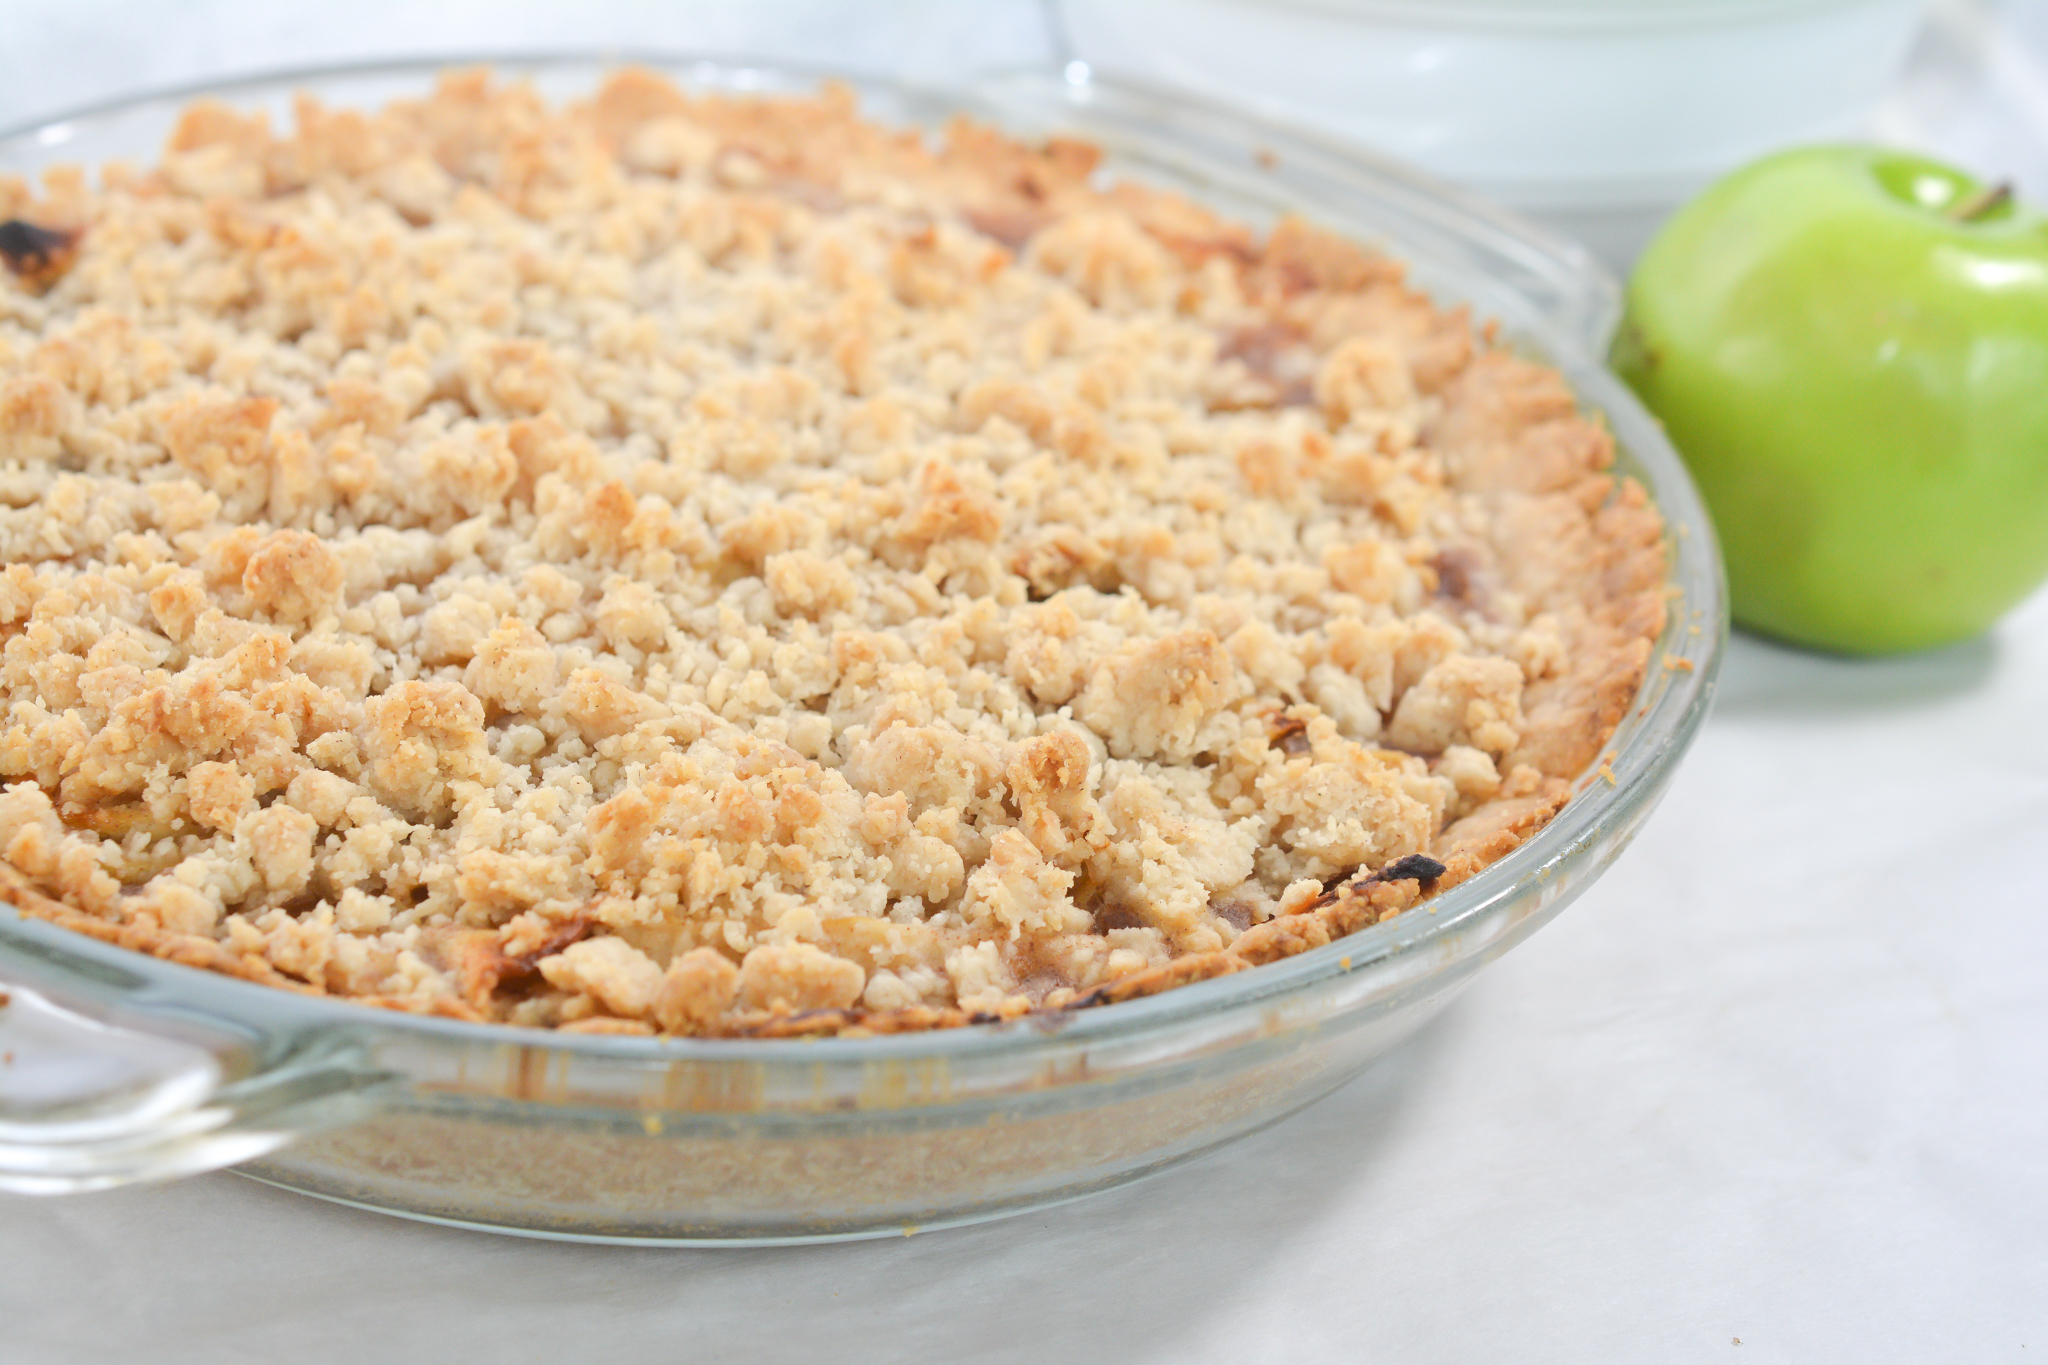 A full Easy Apple Pie with Crumb Topping.